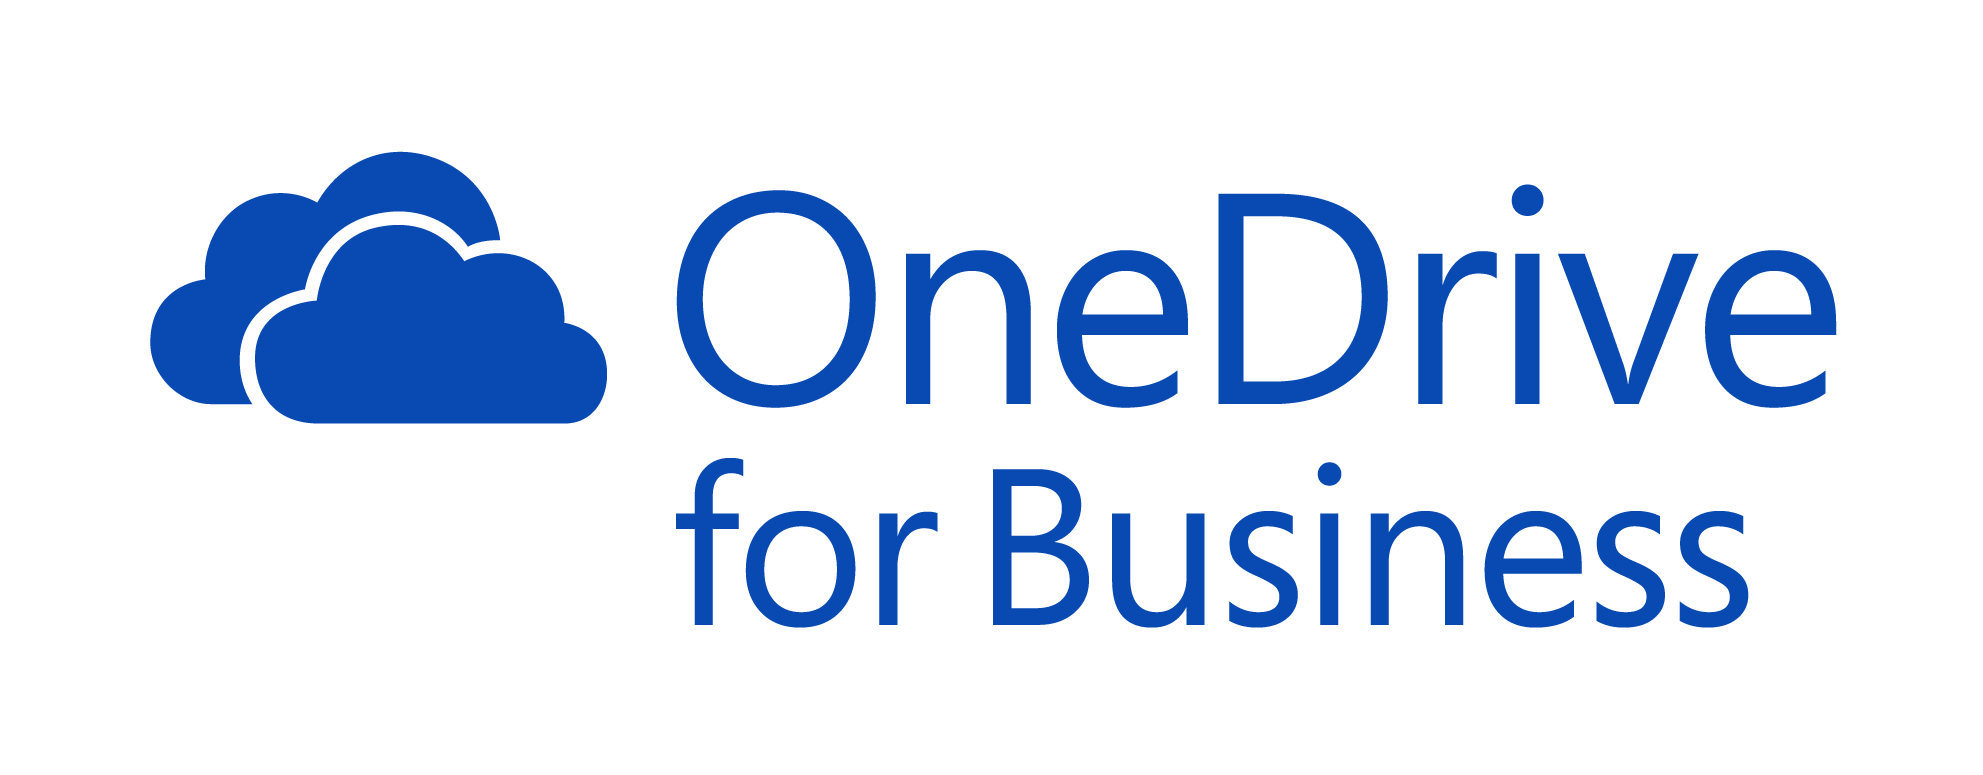 Microsoft Business Logo - SkyDrive and SkyDrive Pro are now OneDrive and OneDrive for Business ...